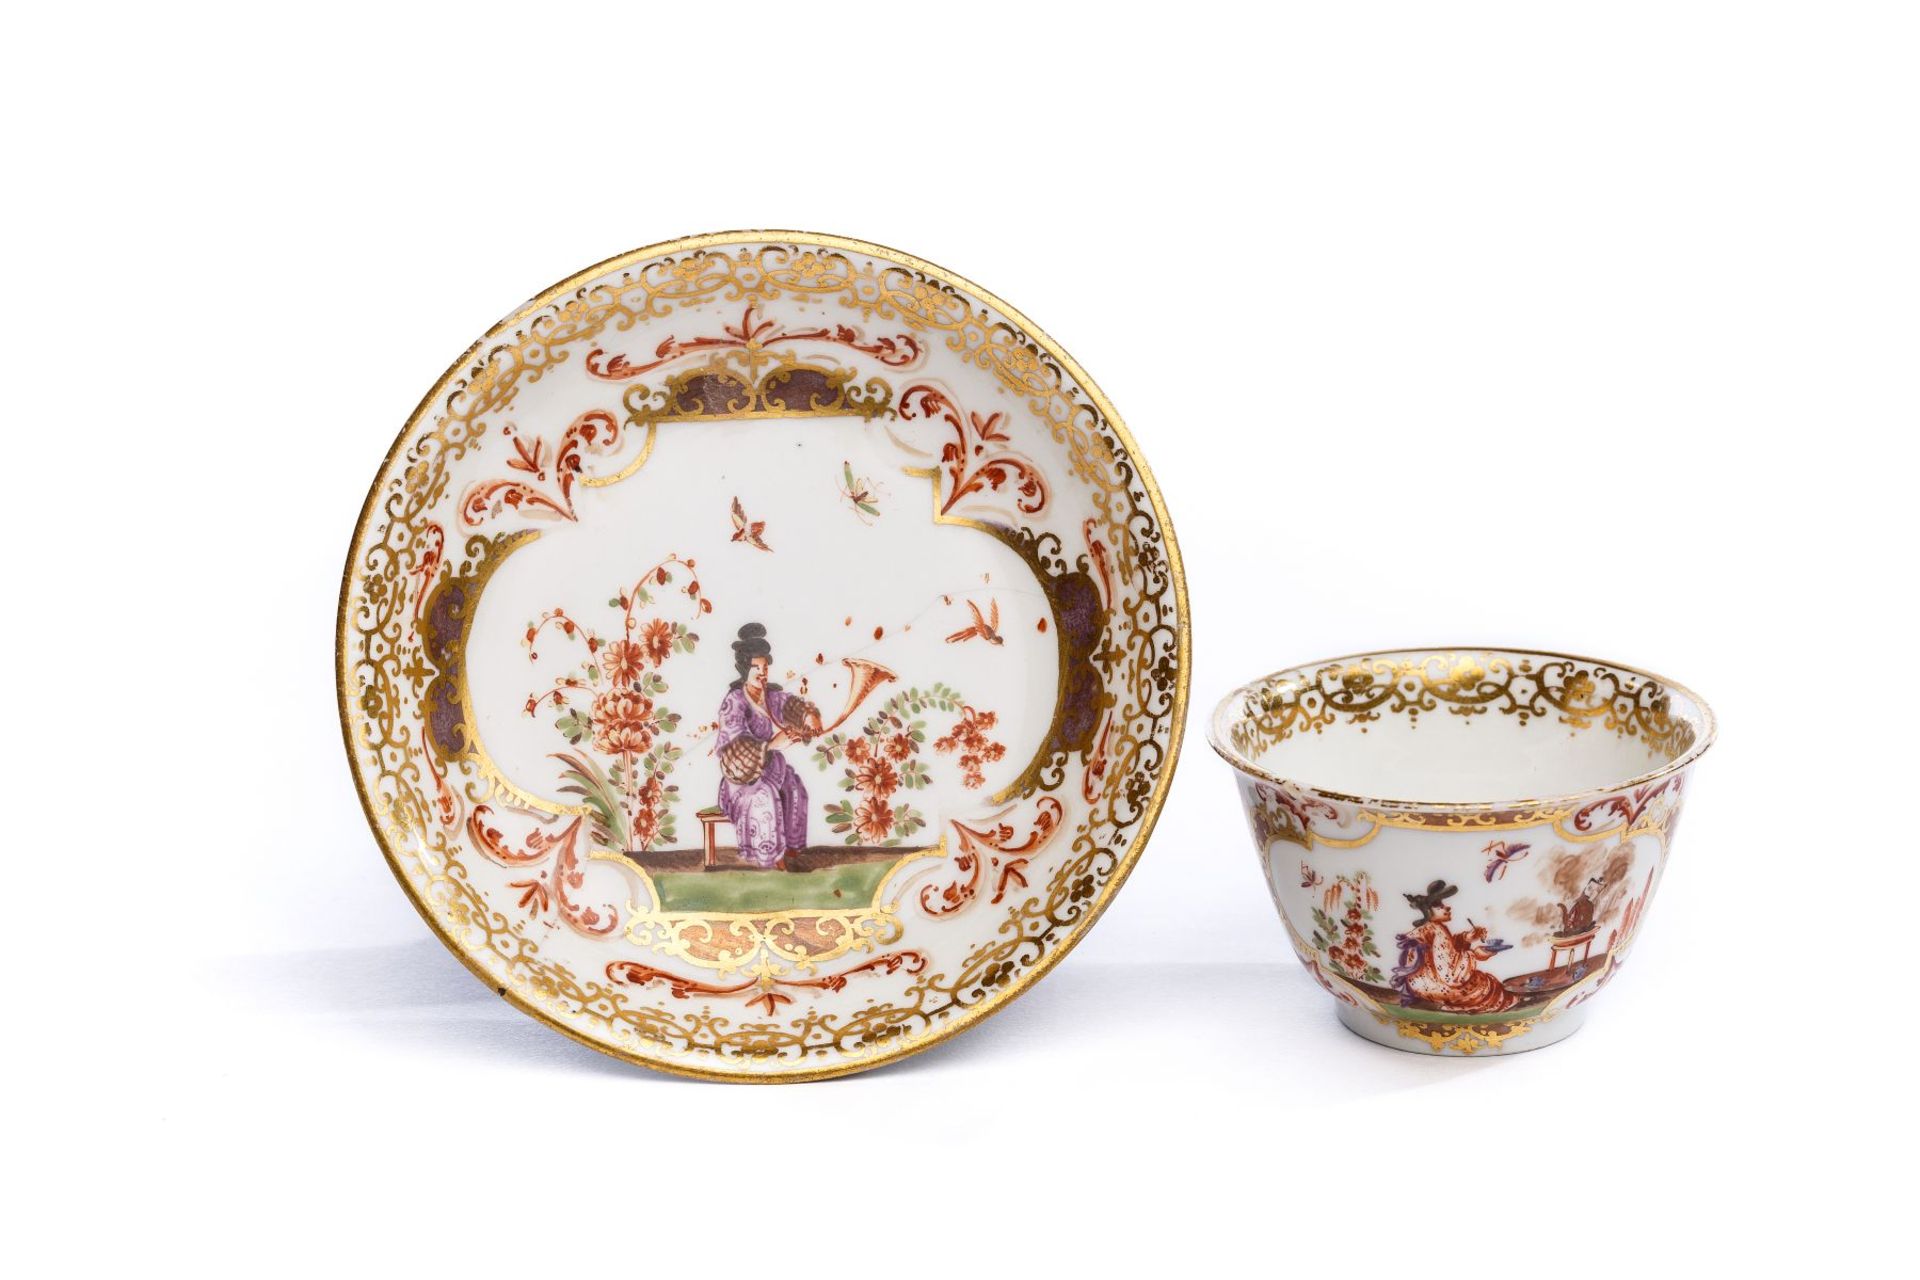 Bowl with Saucer, Meissen 1725